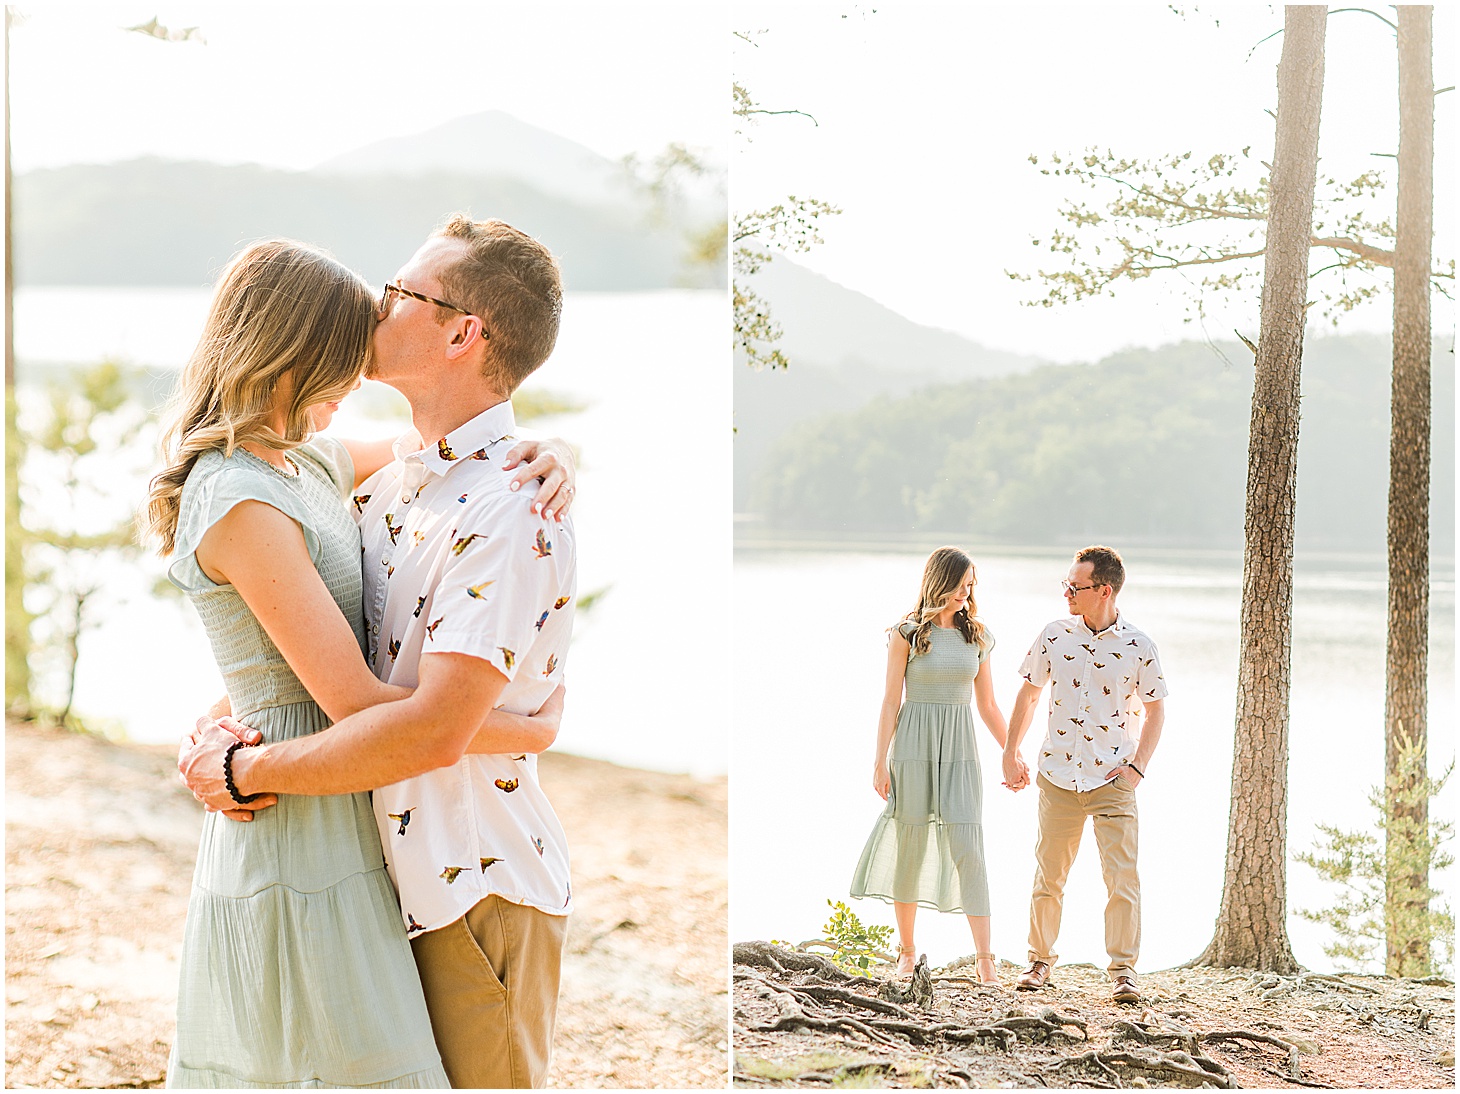 carvinscove_roanokeengagementsession_virginiaweddingphotographer_vaweddingphotographer_photo_0009.jpg